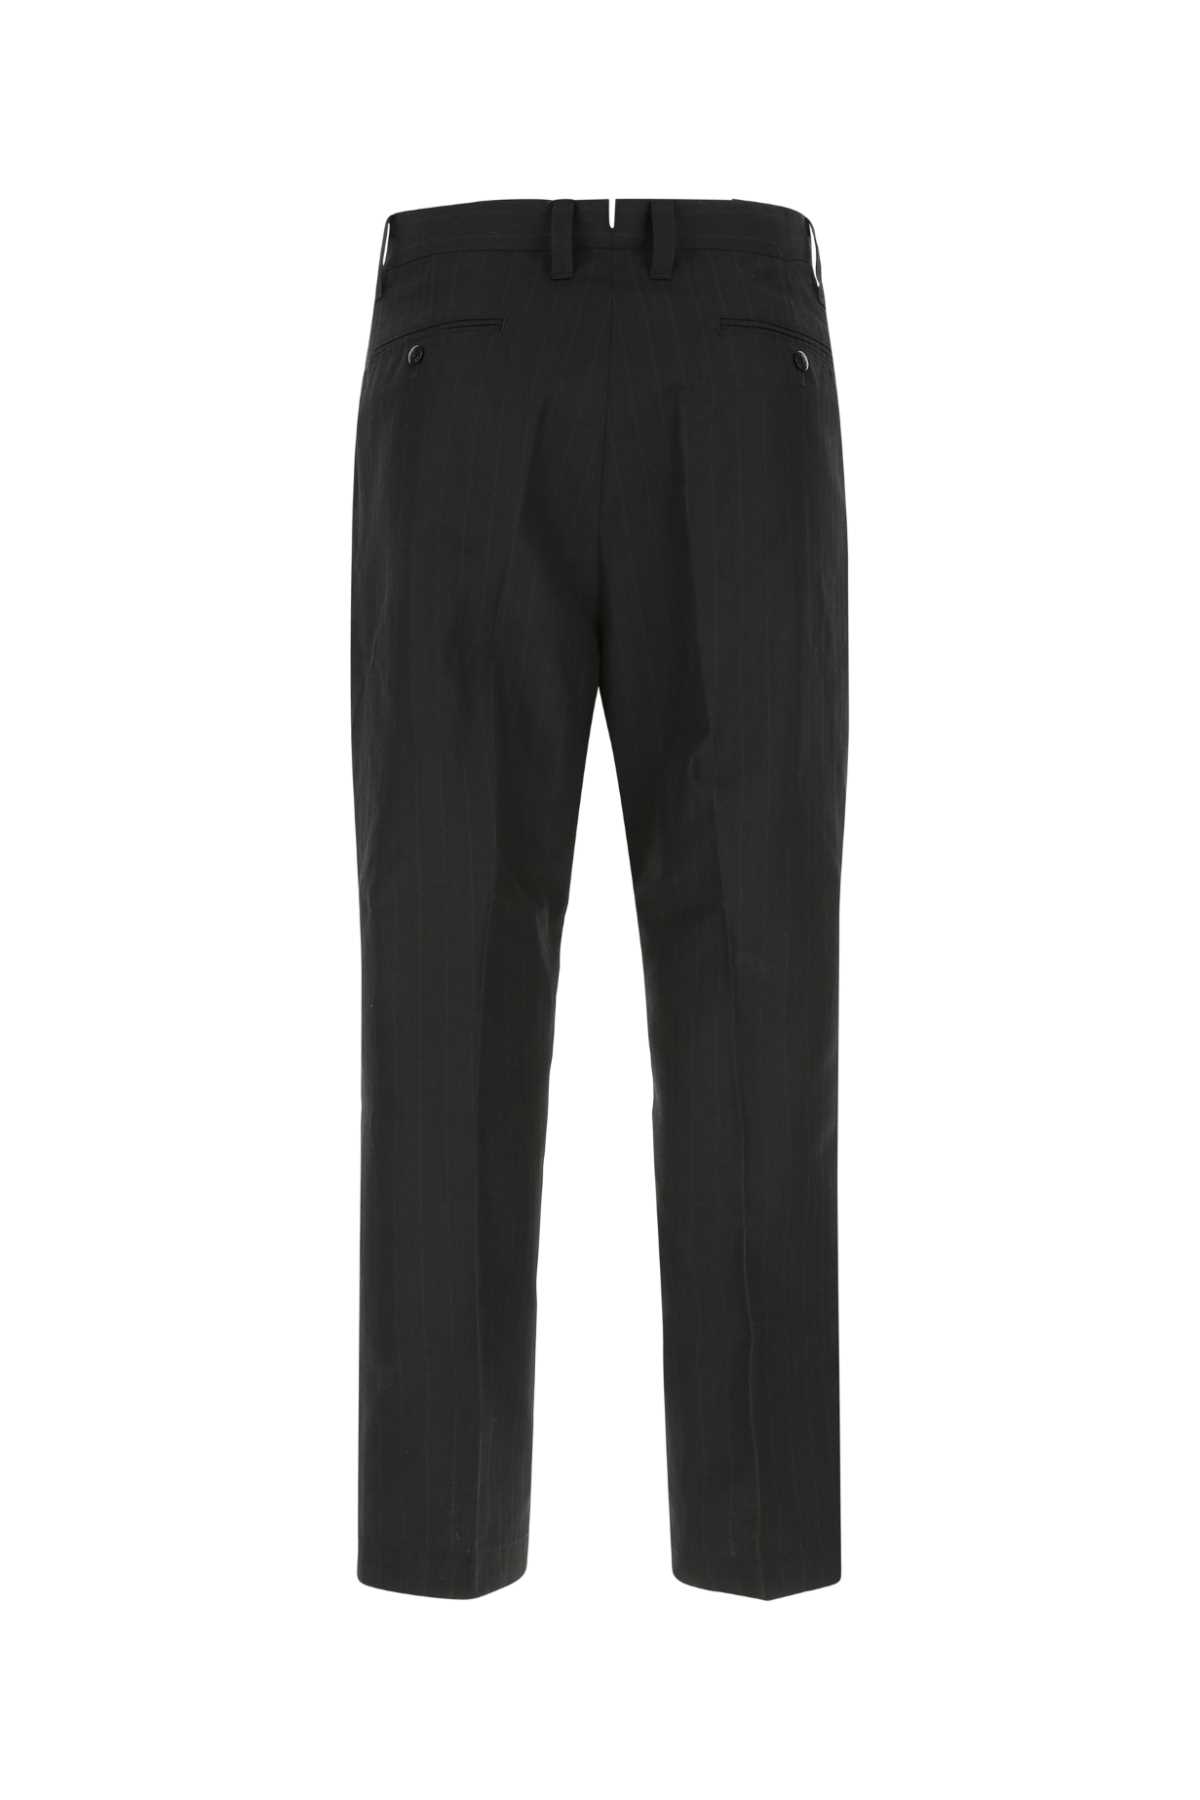 Junya Watanabe Embroidered Polyester Blend Trouser In Navygrey